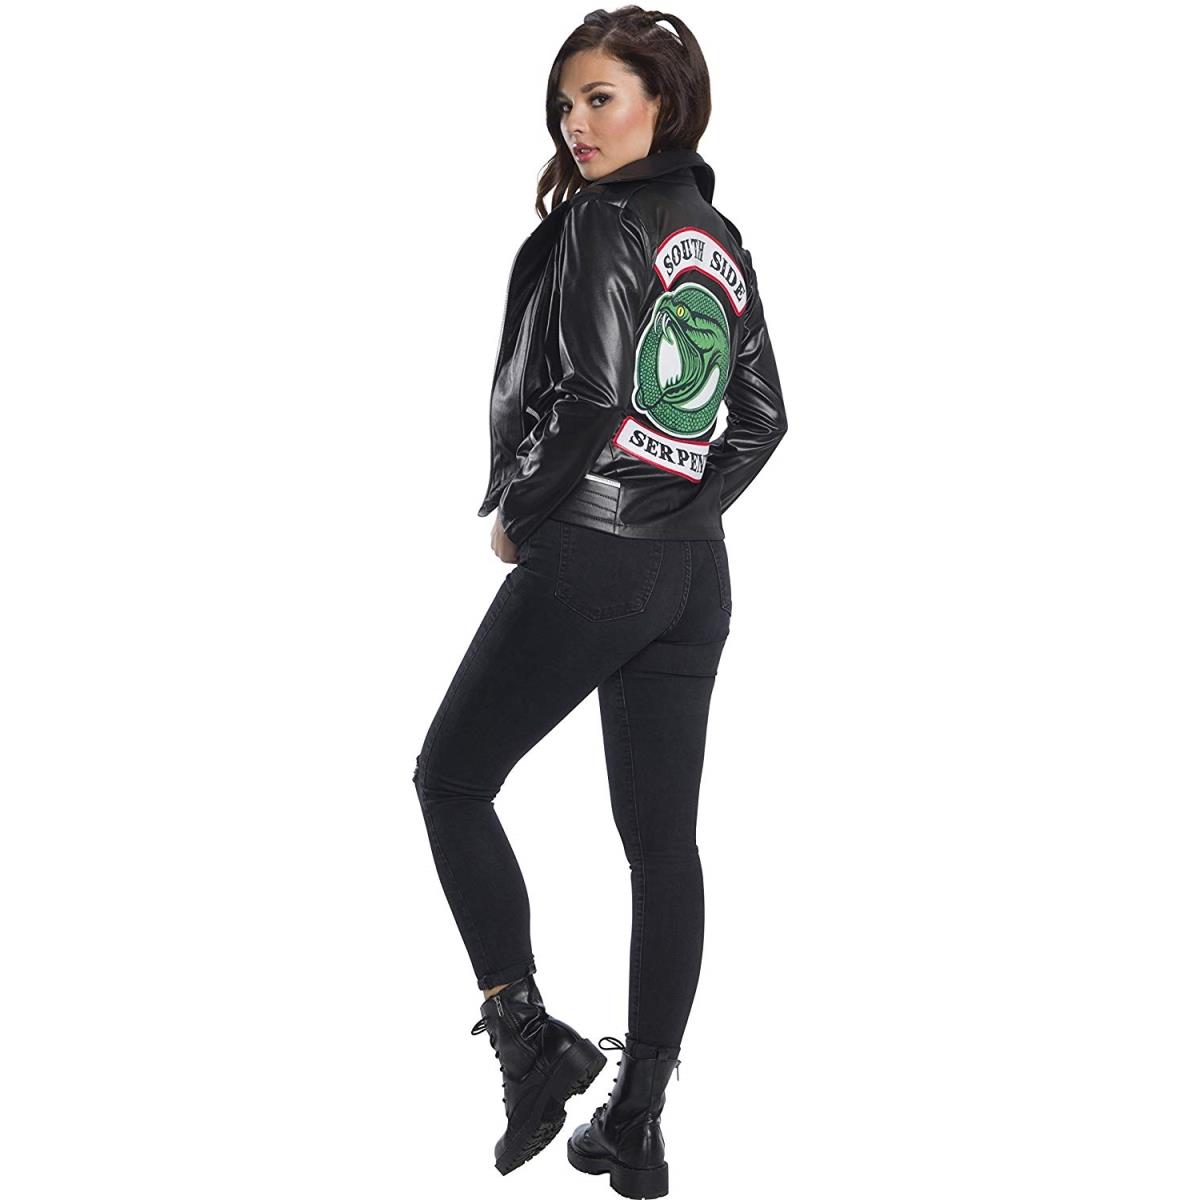 Picture of Rubies 404144 Riverdale Toni Topaz Deluxe Serpent Jacket Costume - Medium